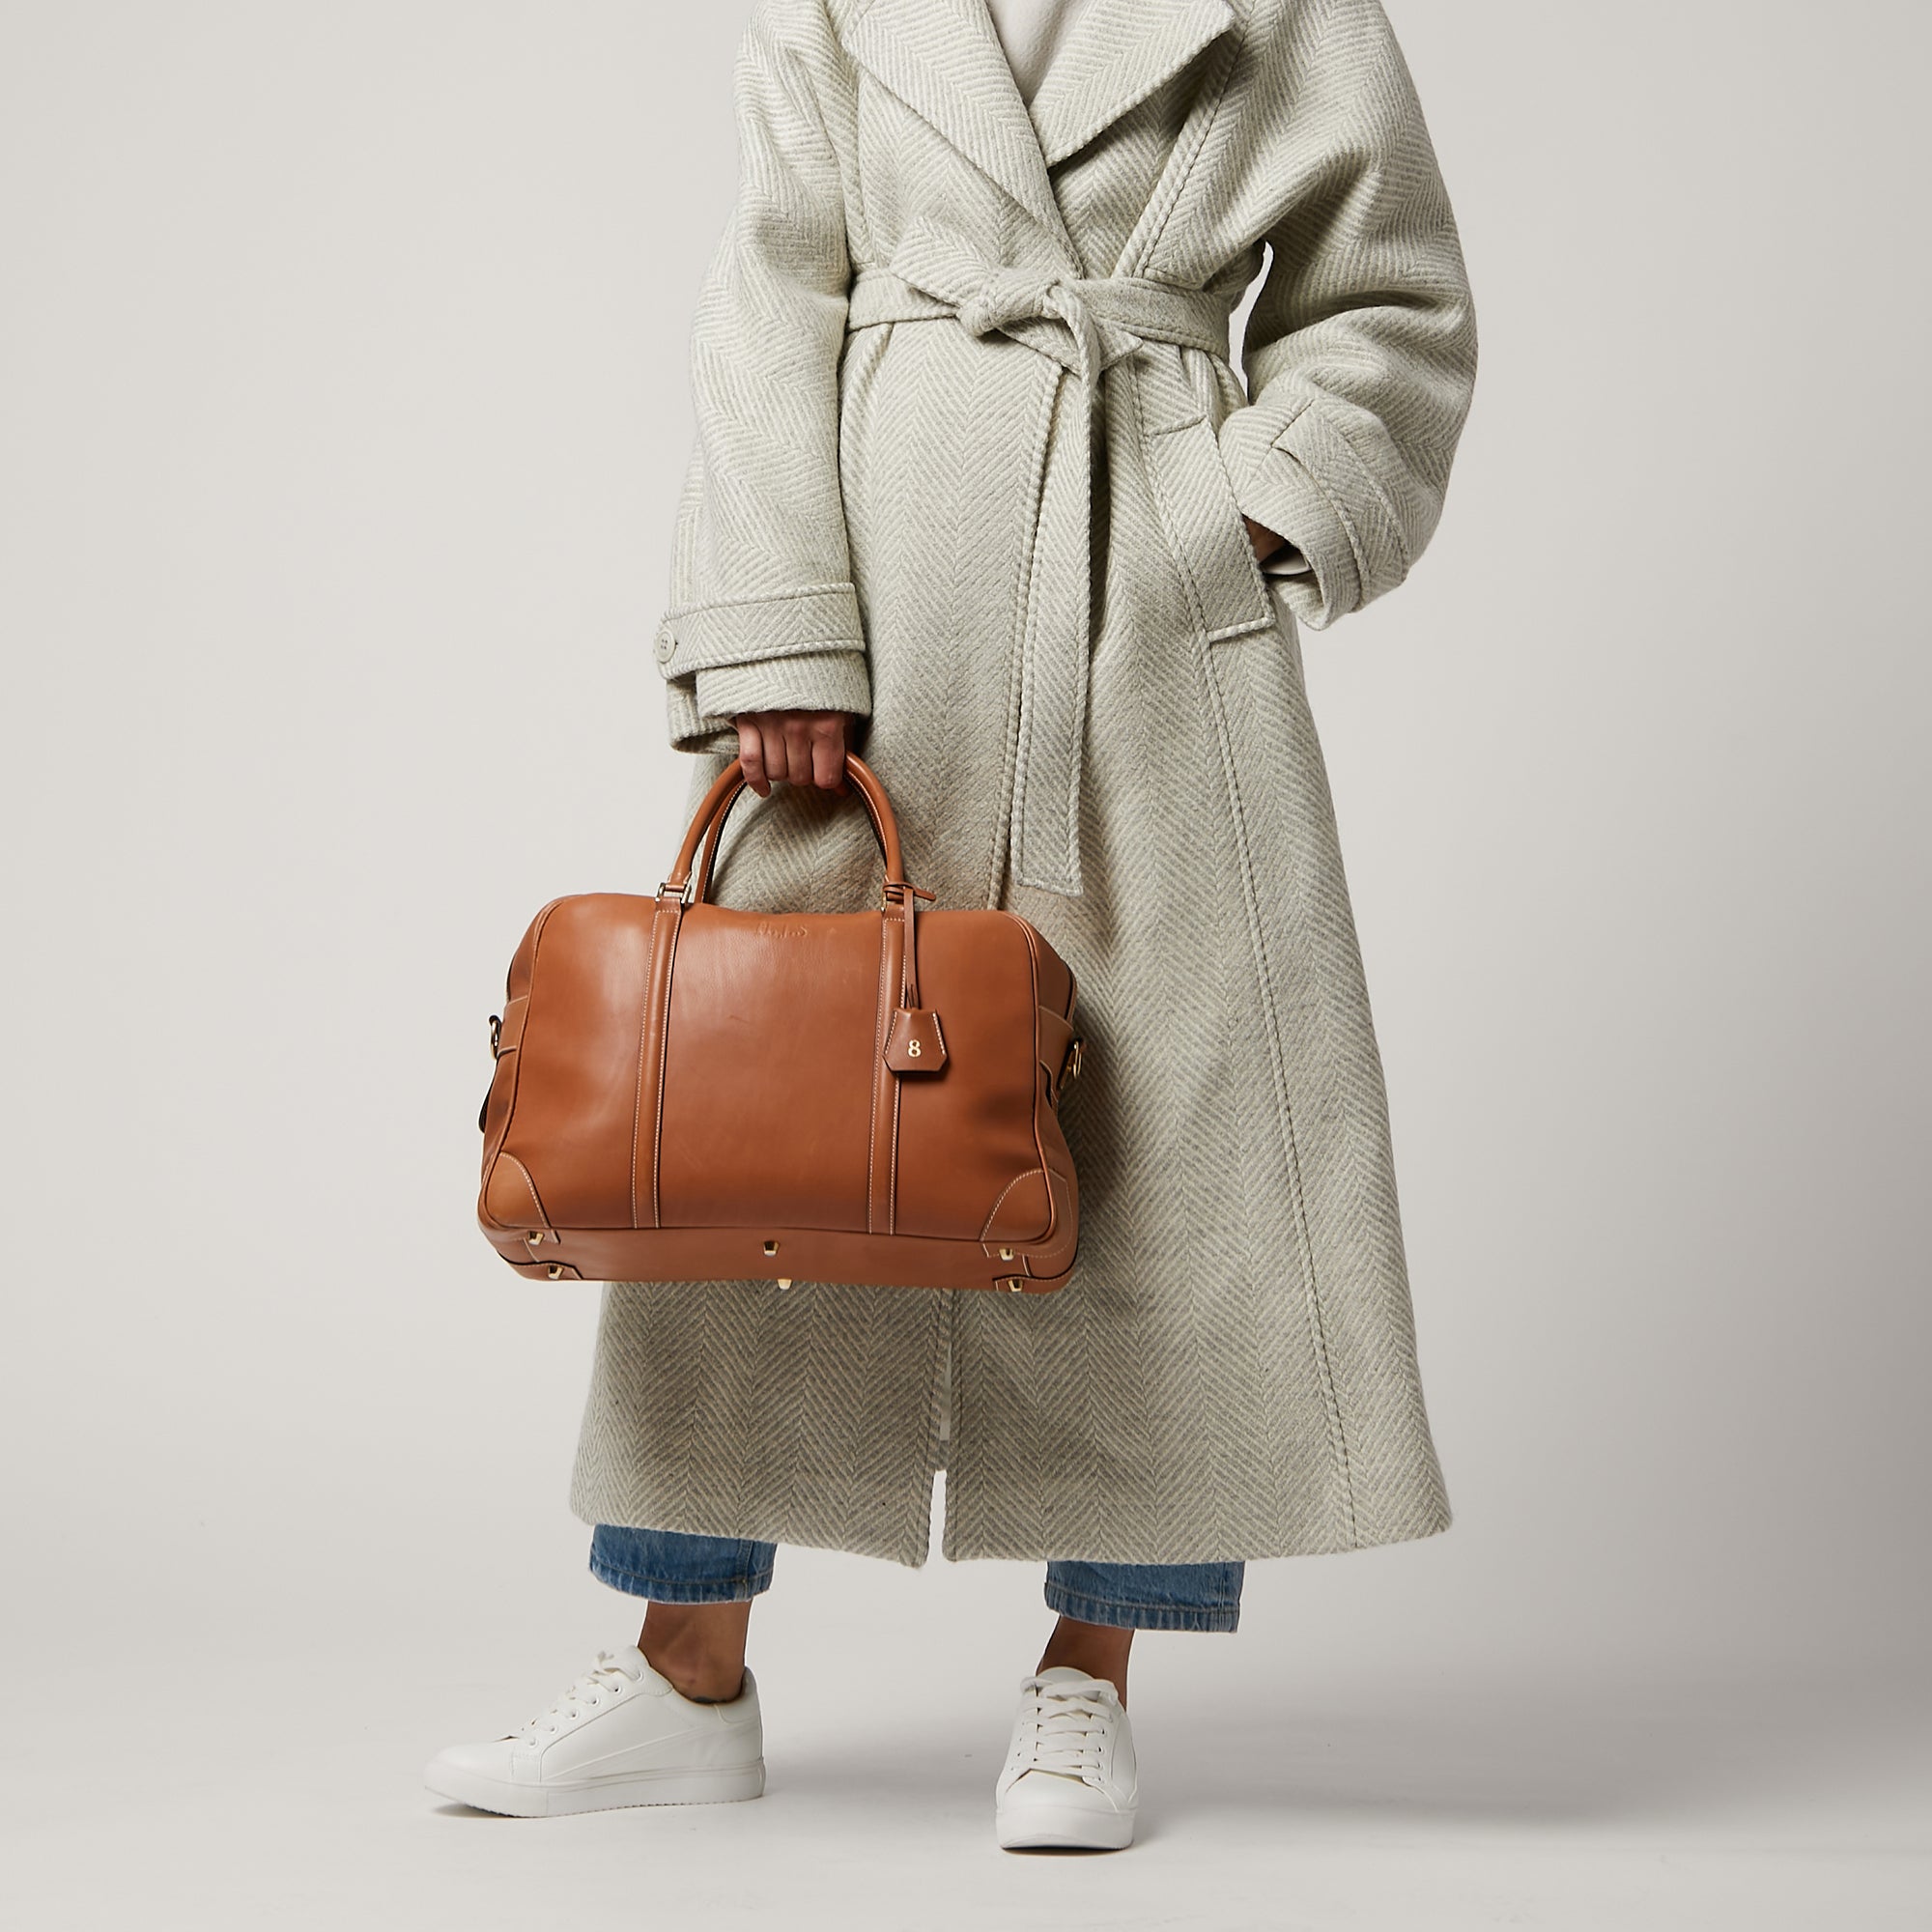 Bespoke Latimer -

                  
                    Butter Leather in Tan -
                  

                  Anya Hindmarch US
